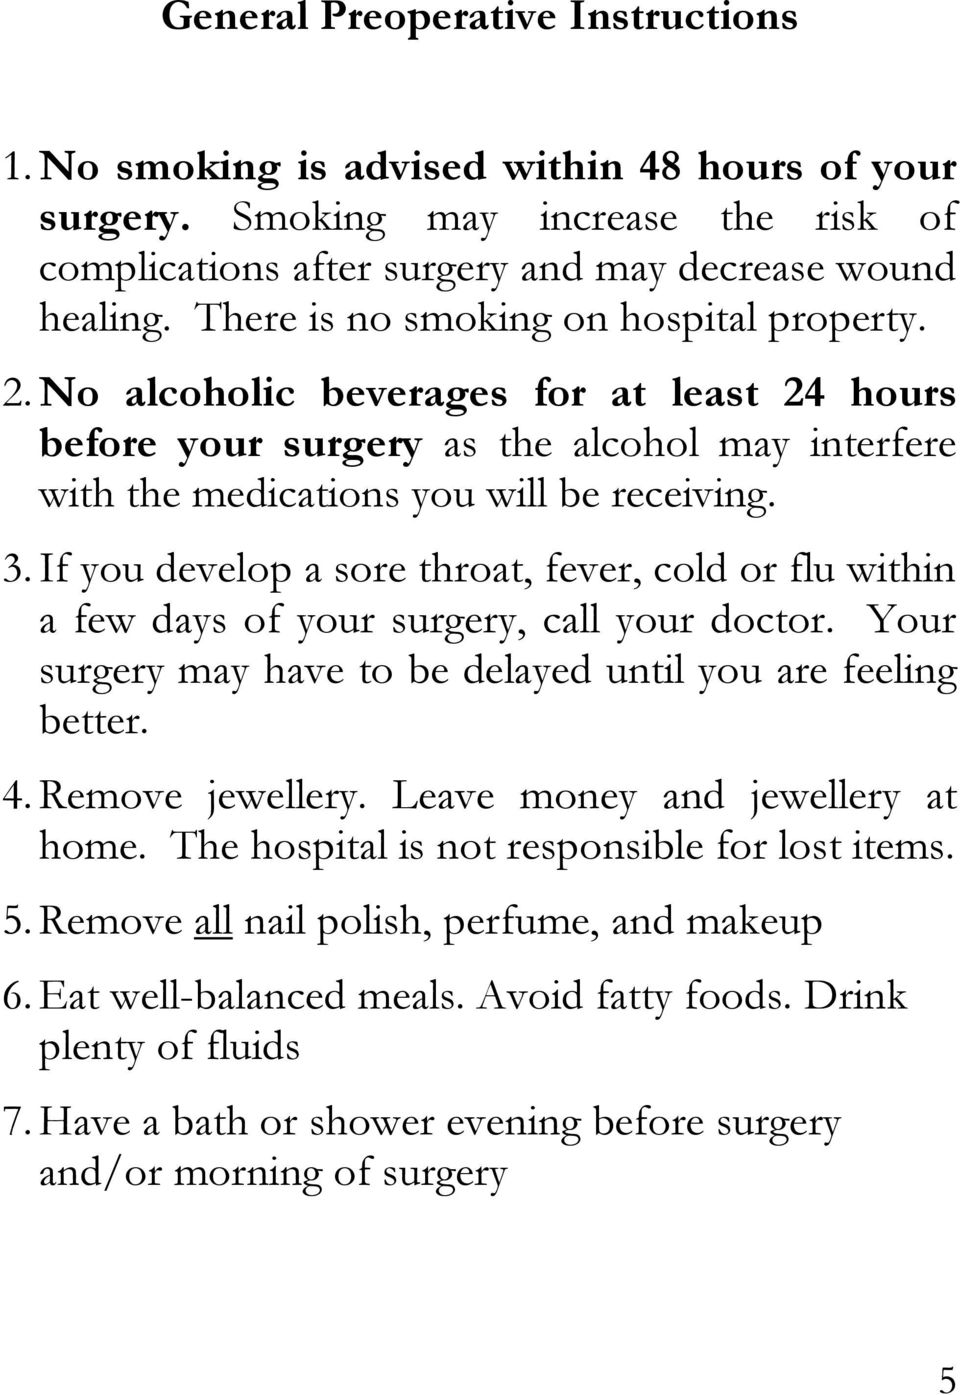 If you develop a sore throat, fever, cold or flu within a few days of your surgery, call your doctor. Your surgery may have to be delayed until you are feeling better. 4. Remove jewellery.